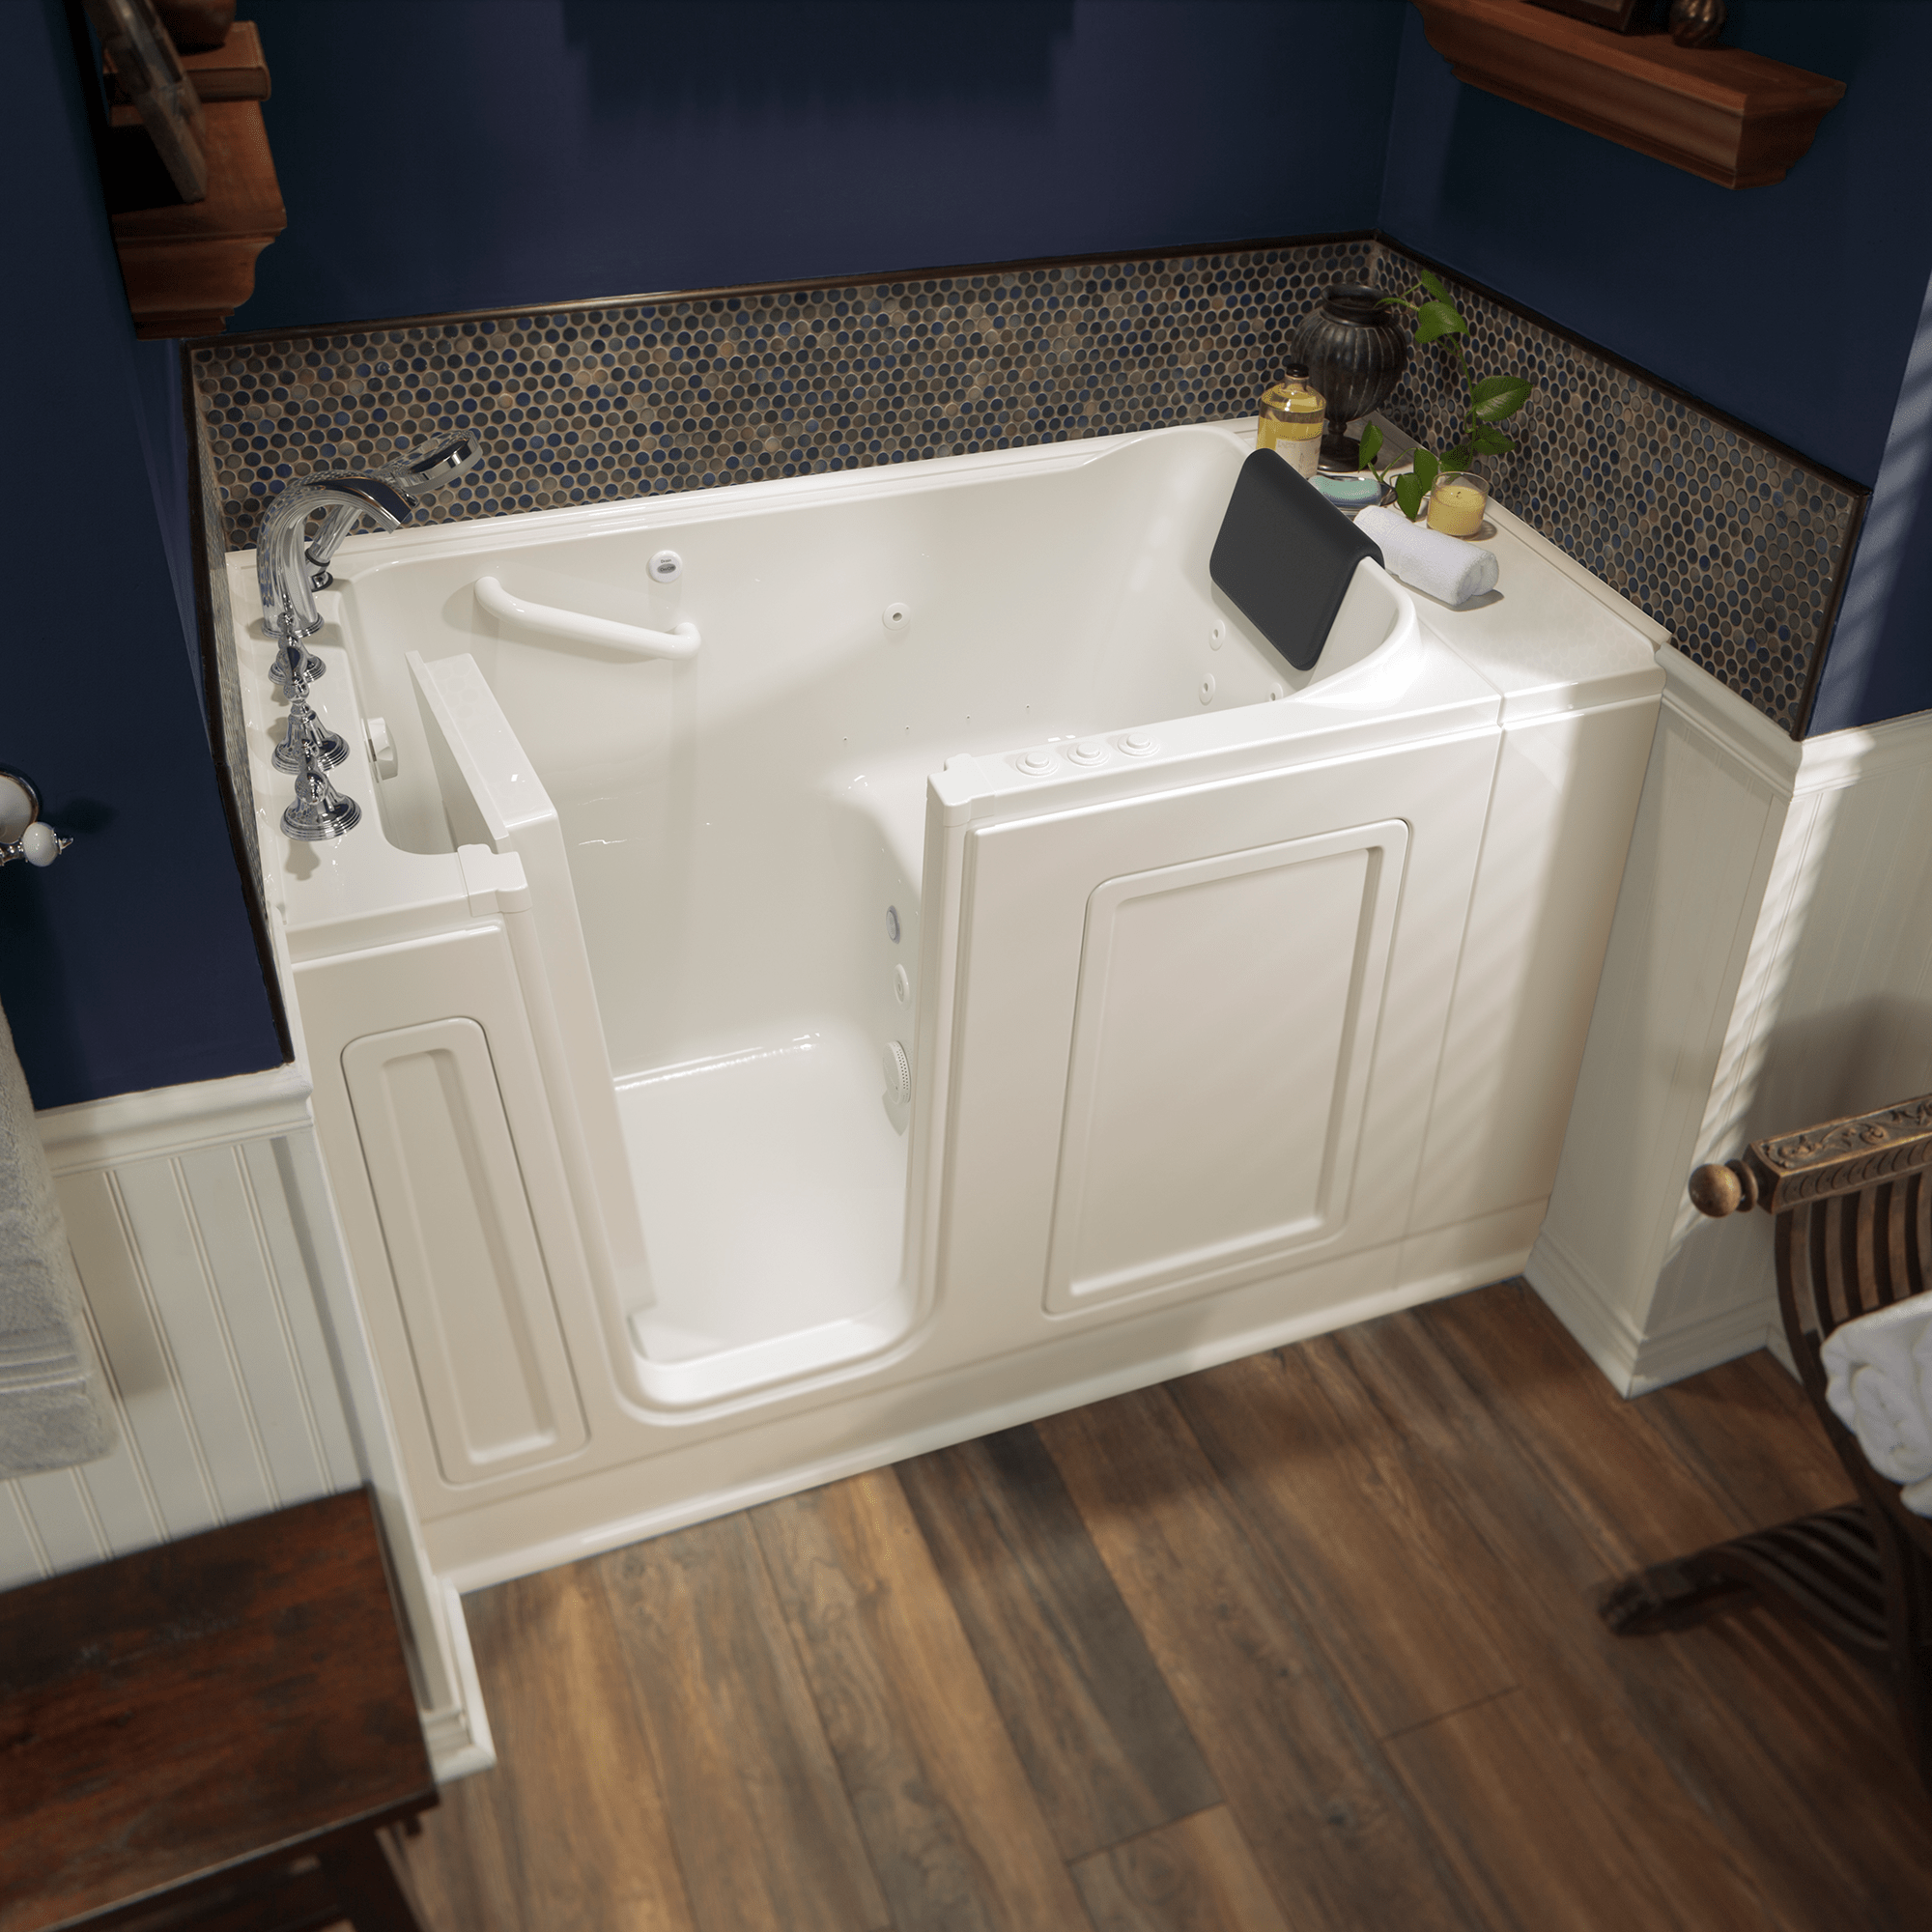 Acrylic Luxury Series 30 x 51 -Inch Walk-in Tub With Combination Air Spa and Whirlpool Systems - Left-Hand Drain With Faucet